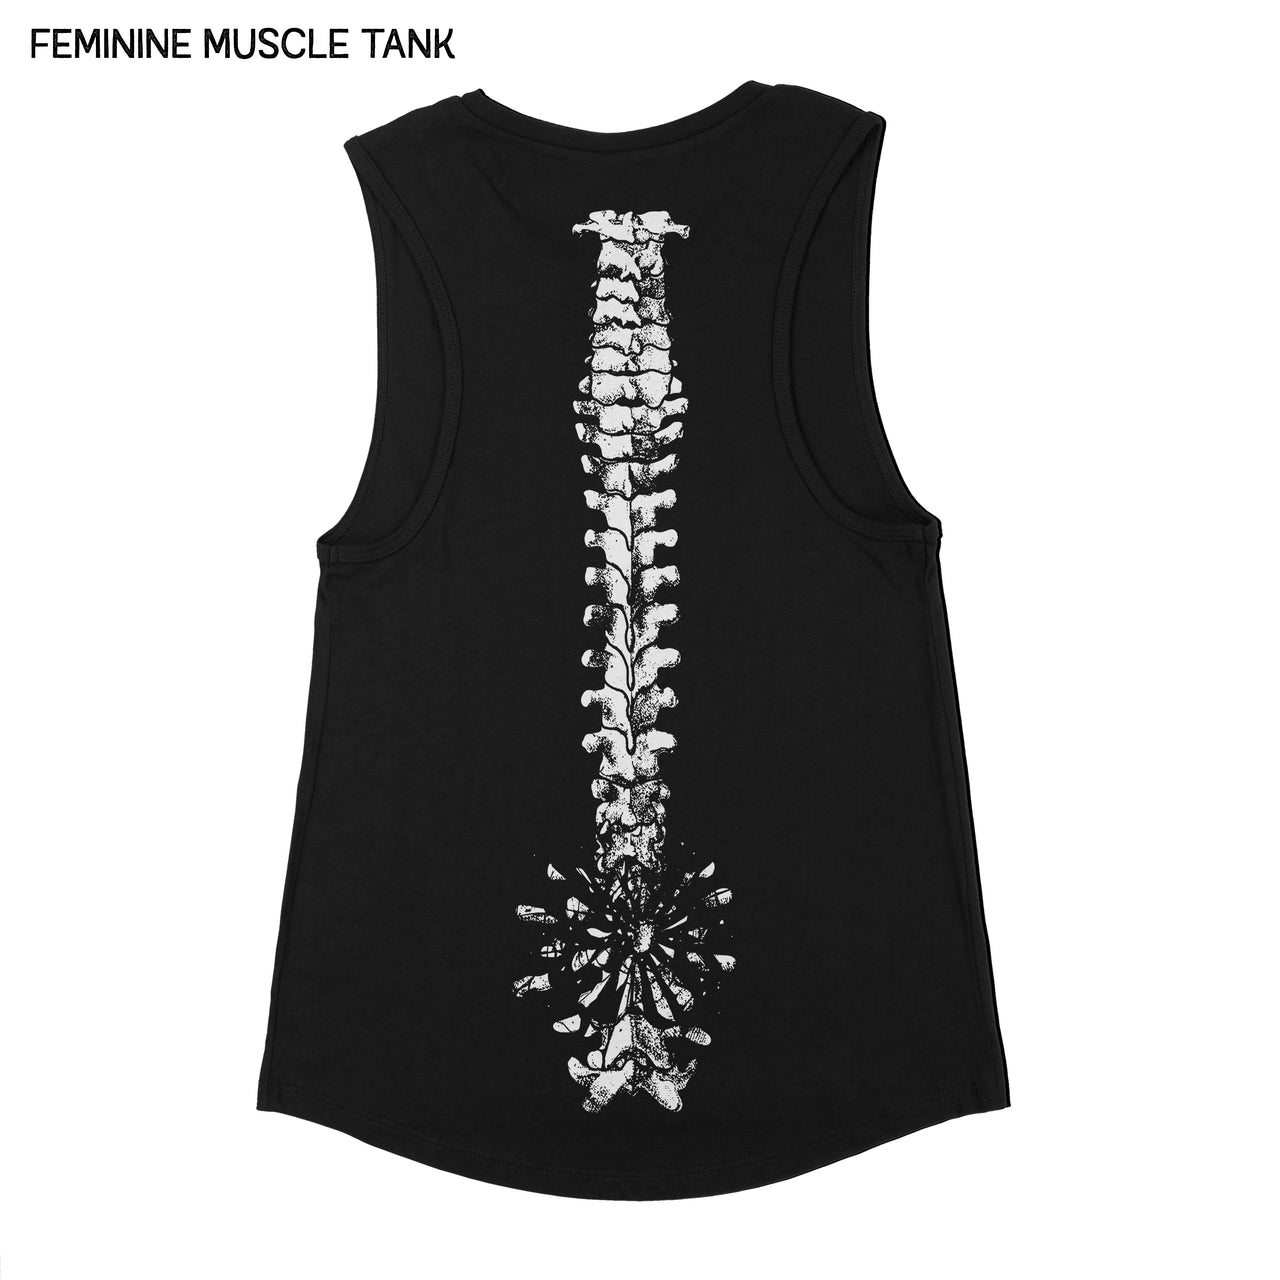 Back Pain Muscle Tank Top